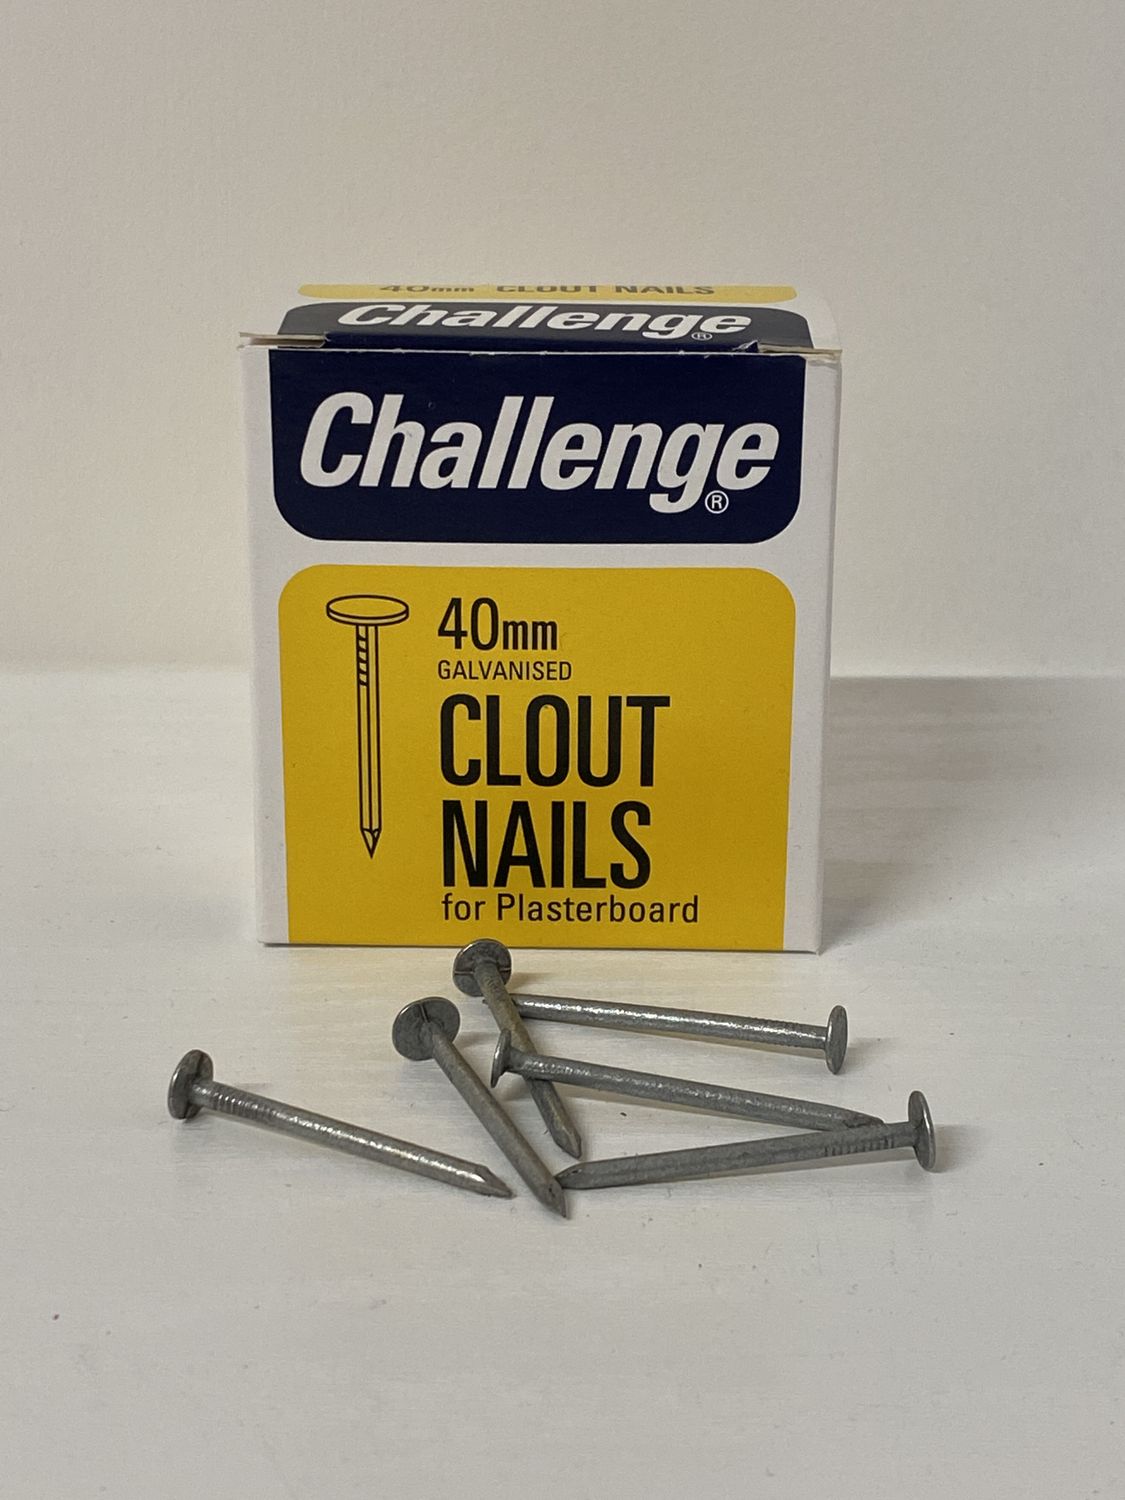 Challenge Clout Nails 40mm Galvanised Box 225g